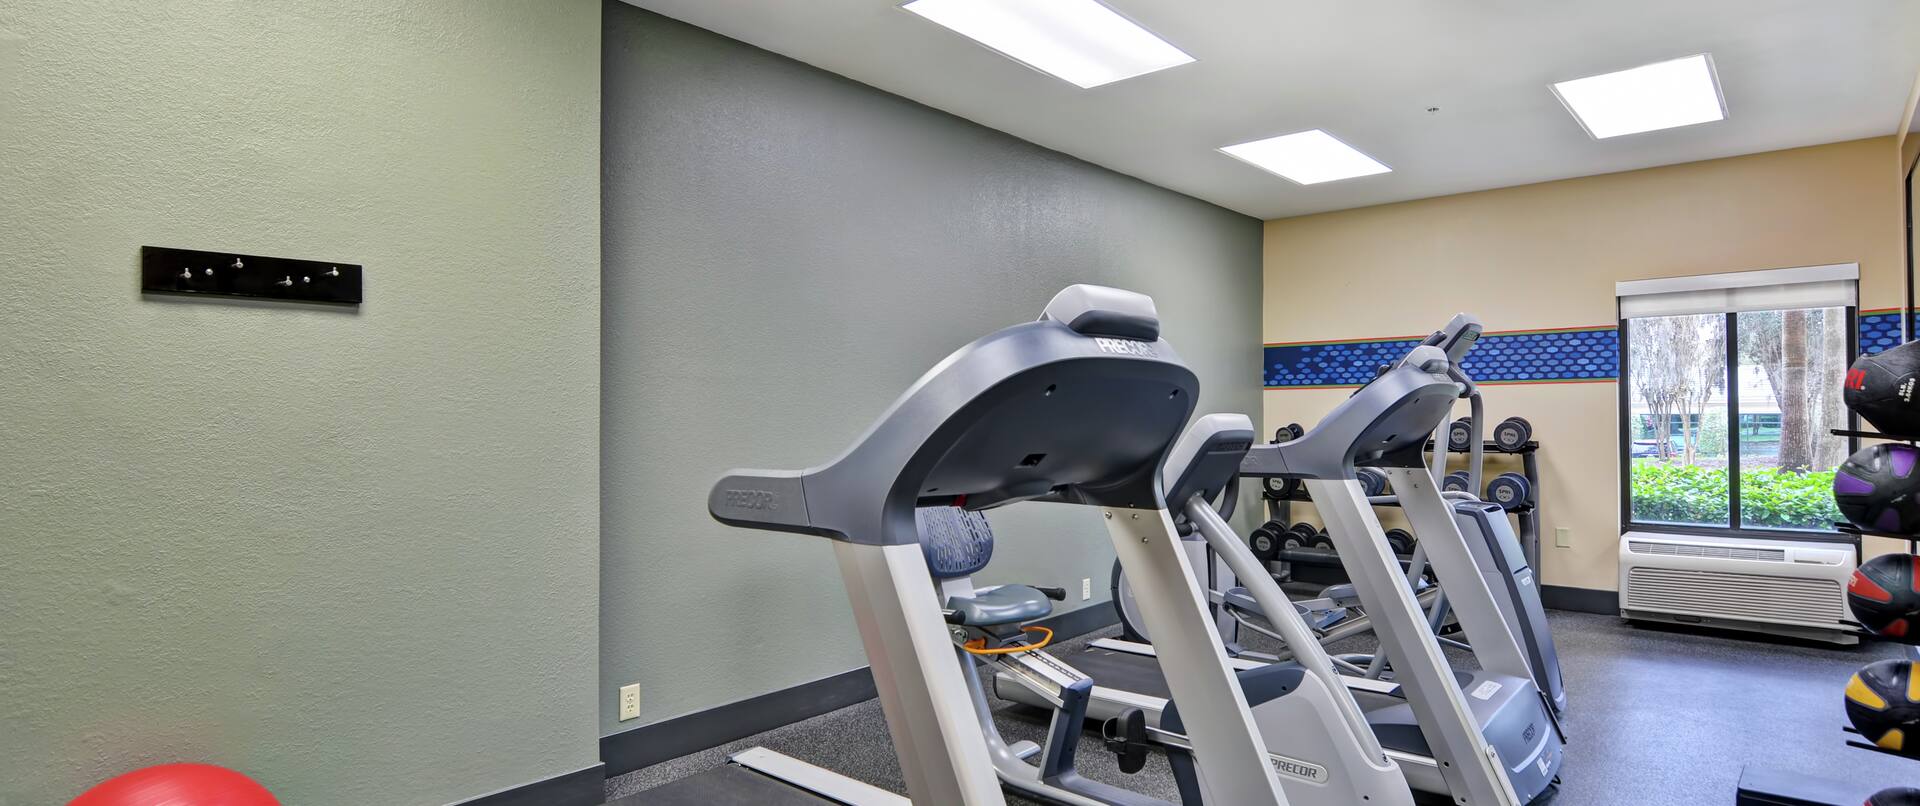 Fitness center with Treadmills and Weights